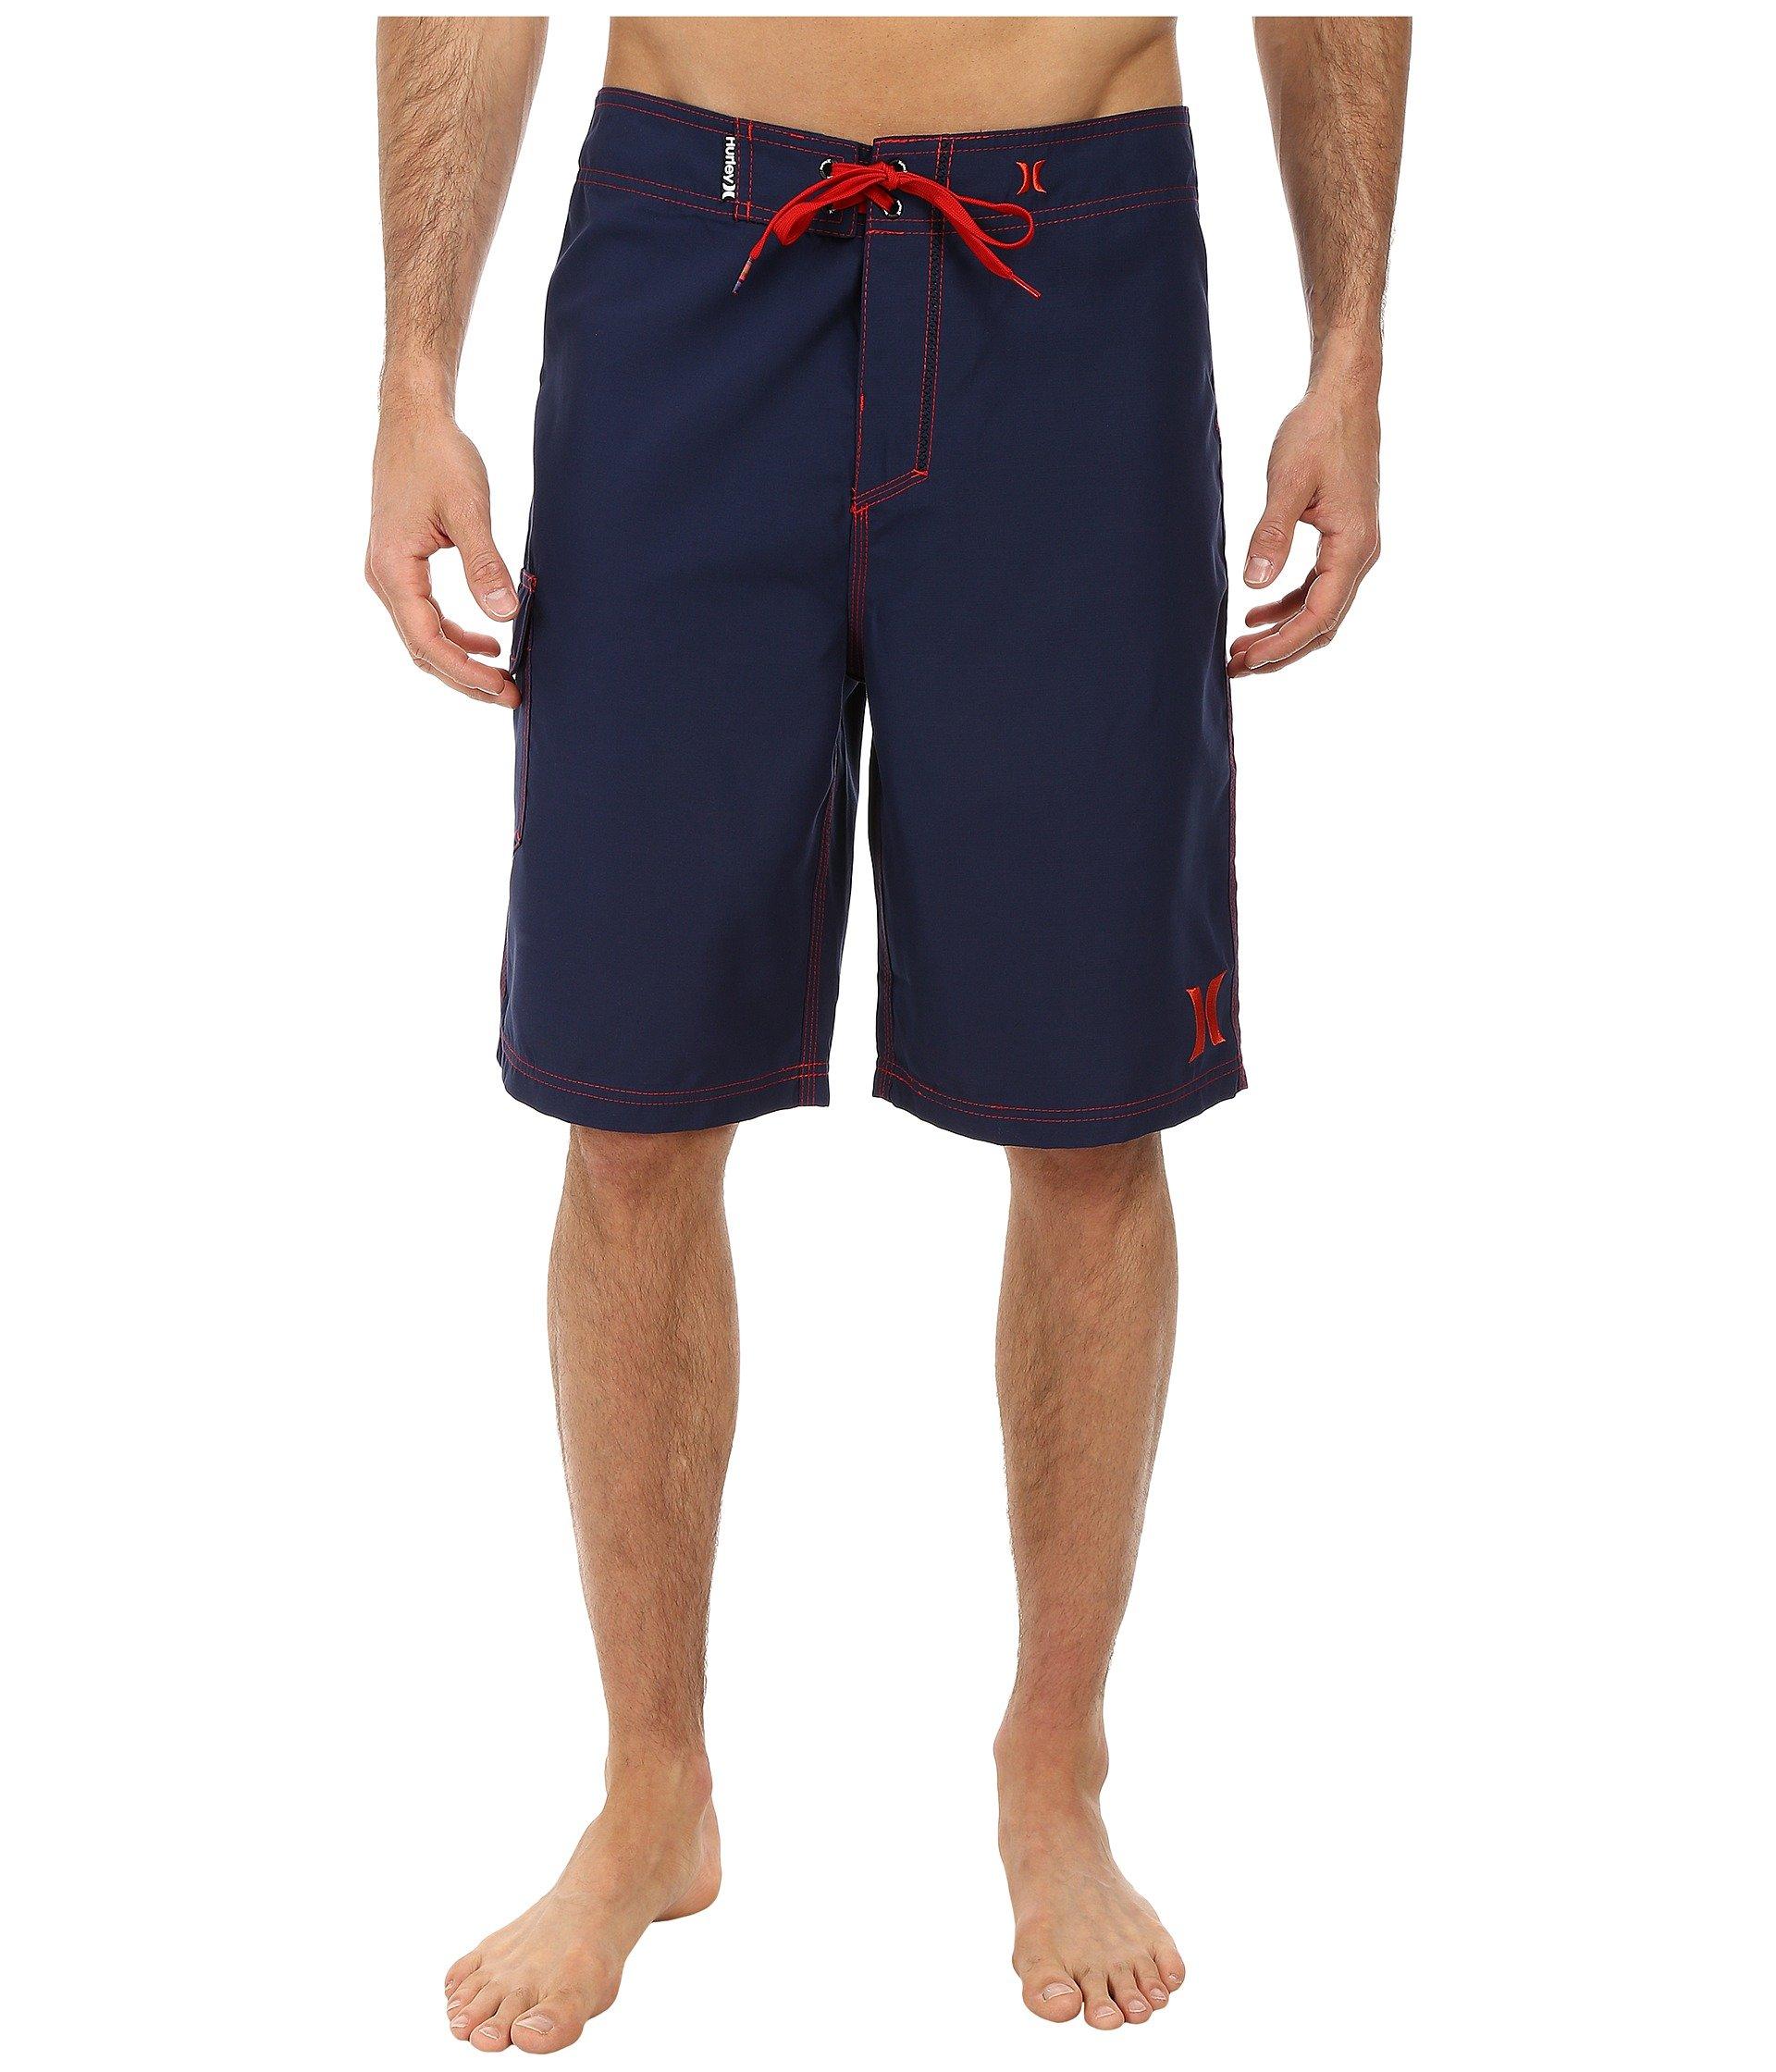 Hurley Synthetic One Only Boardshort 22 in Navy (Blue) for Men - Lyst